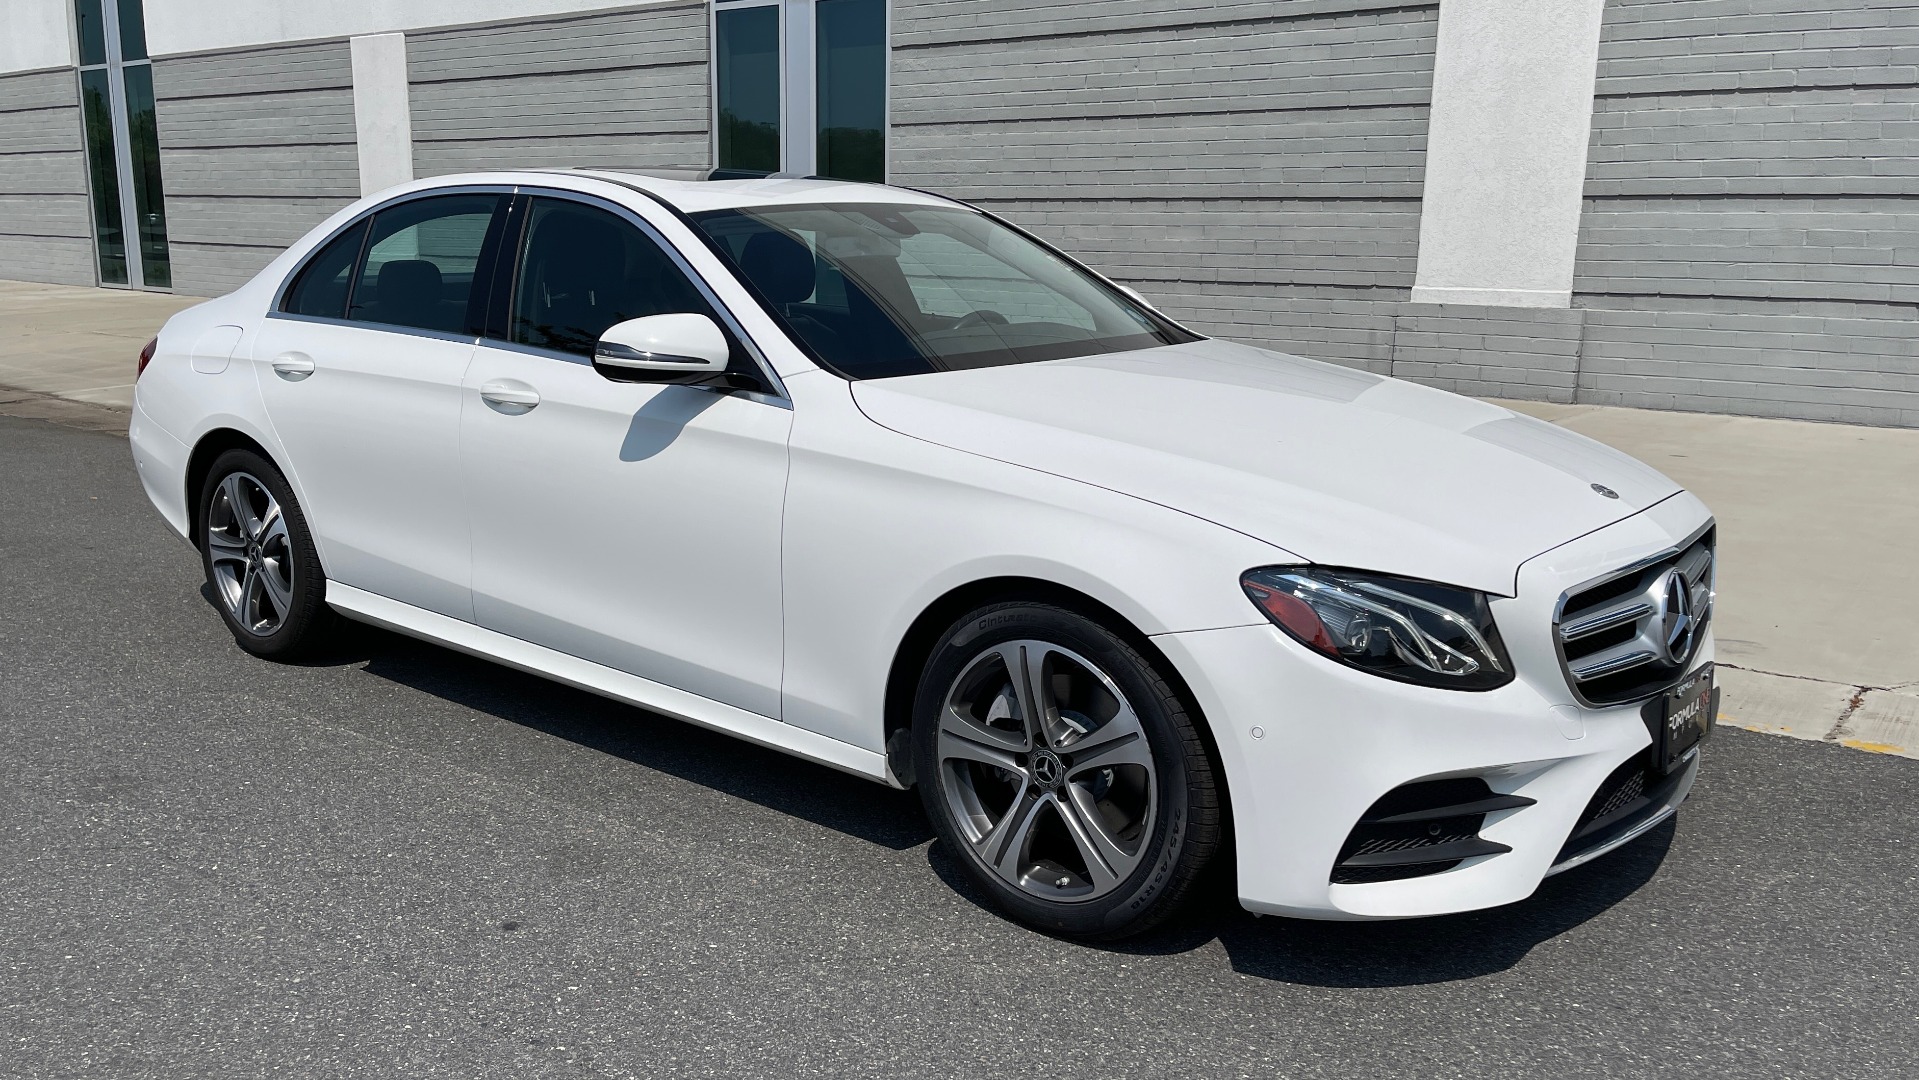 Used 2018 Mercedes-Benz E-CLASS E 300 / 2.0L I4 TURBO / NAV / BSA / SUNROOF / REARVIEW for sale Sold at Formula Imports in Charlotte NC 28227 7